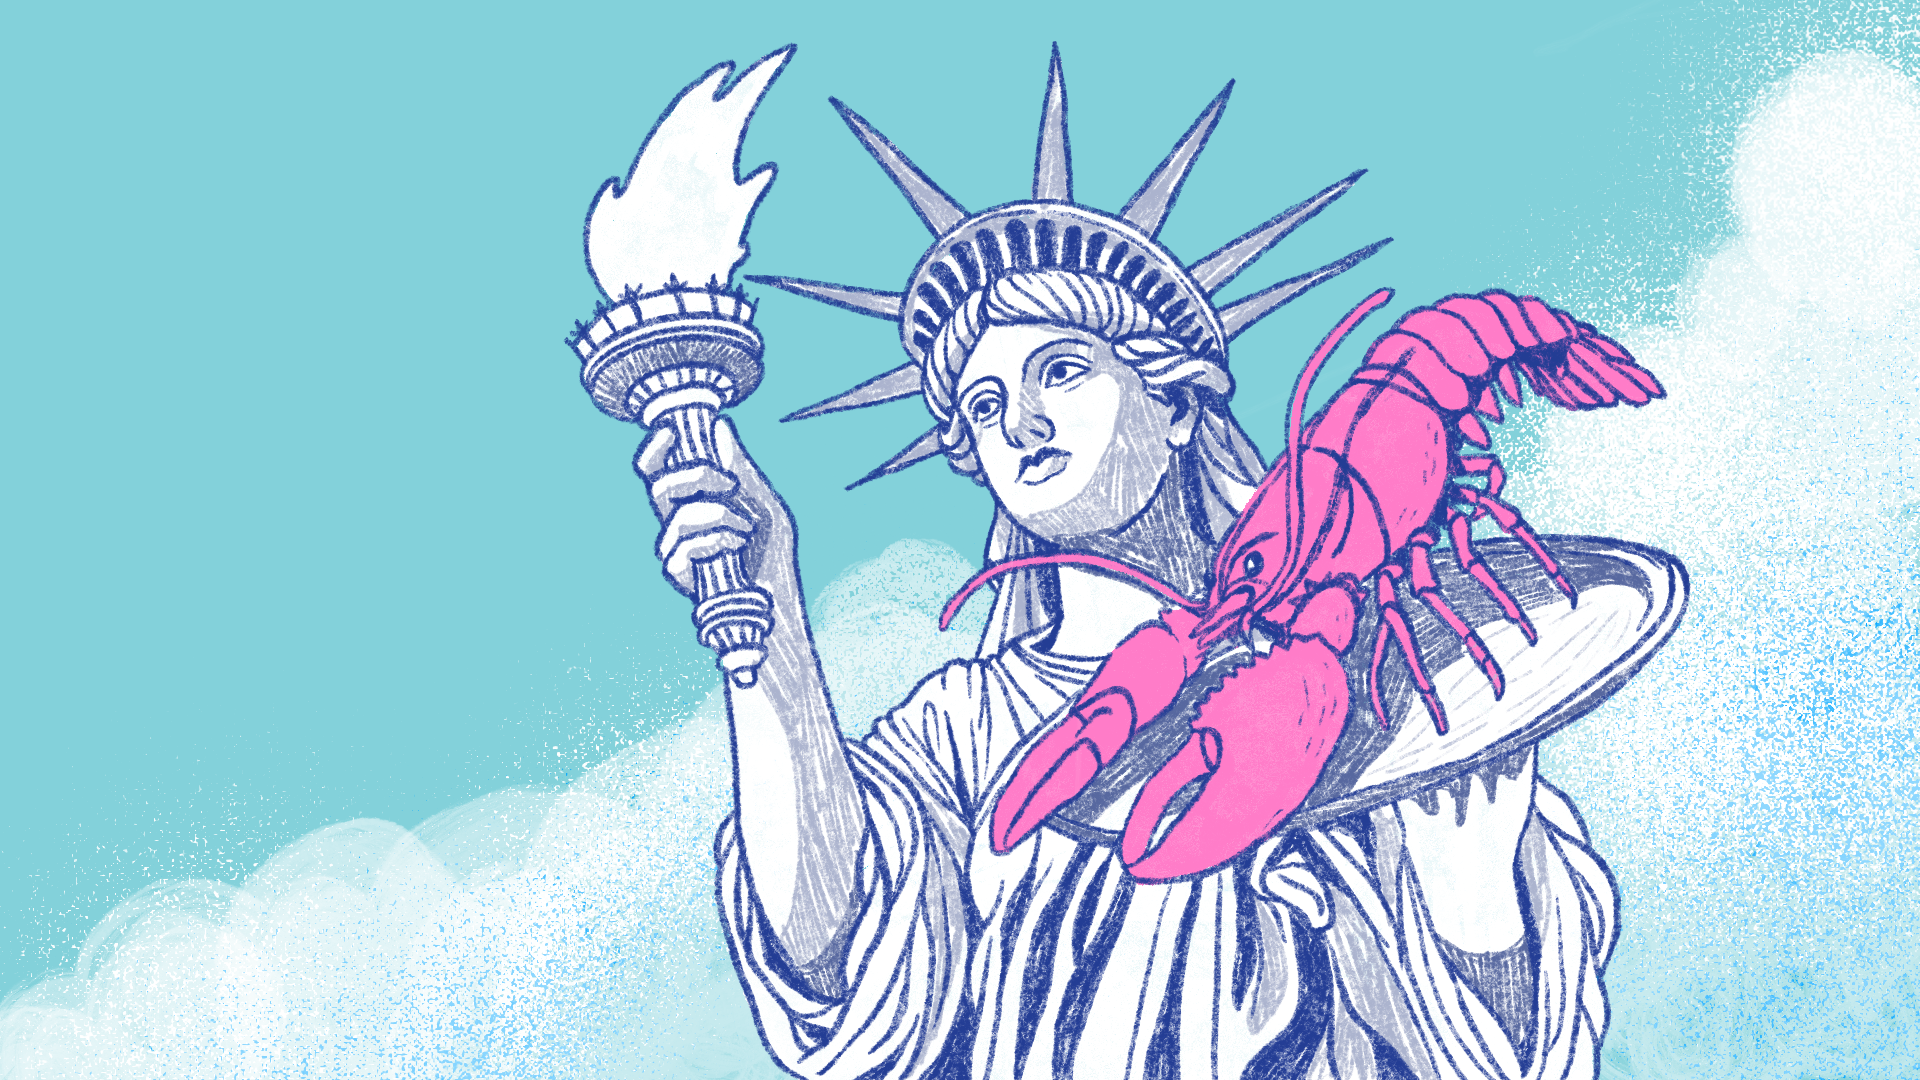 Illustration of Statue of Liberty holding the torch with one hand and a platter with a lobster in the other hand